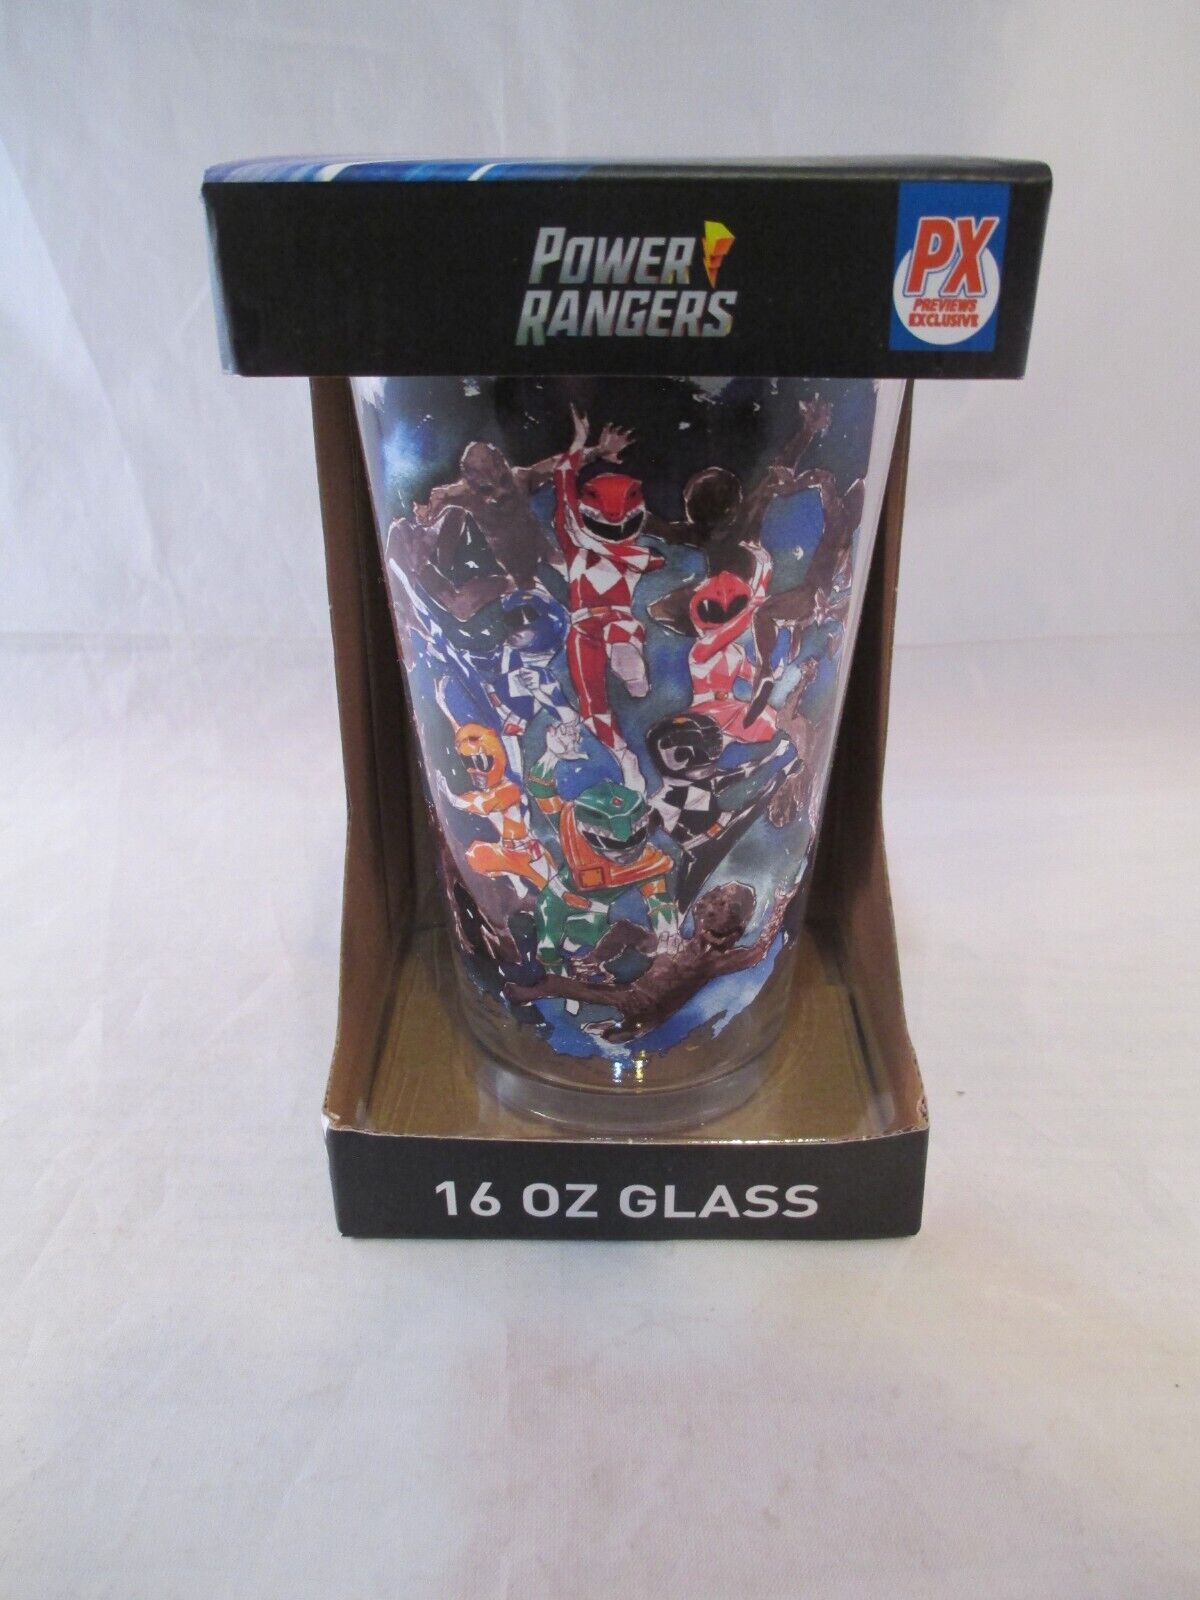 Power Ranger Previews Exclusive 16 oz. Glass new 2021 Surreal